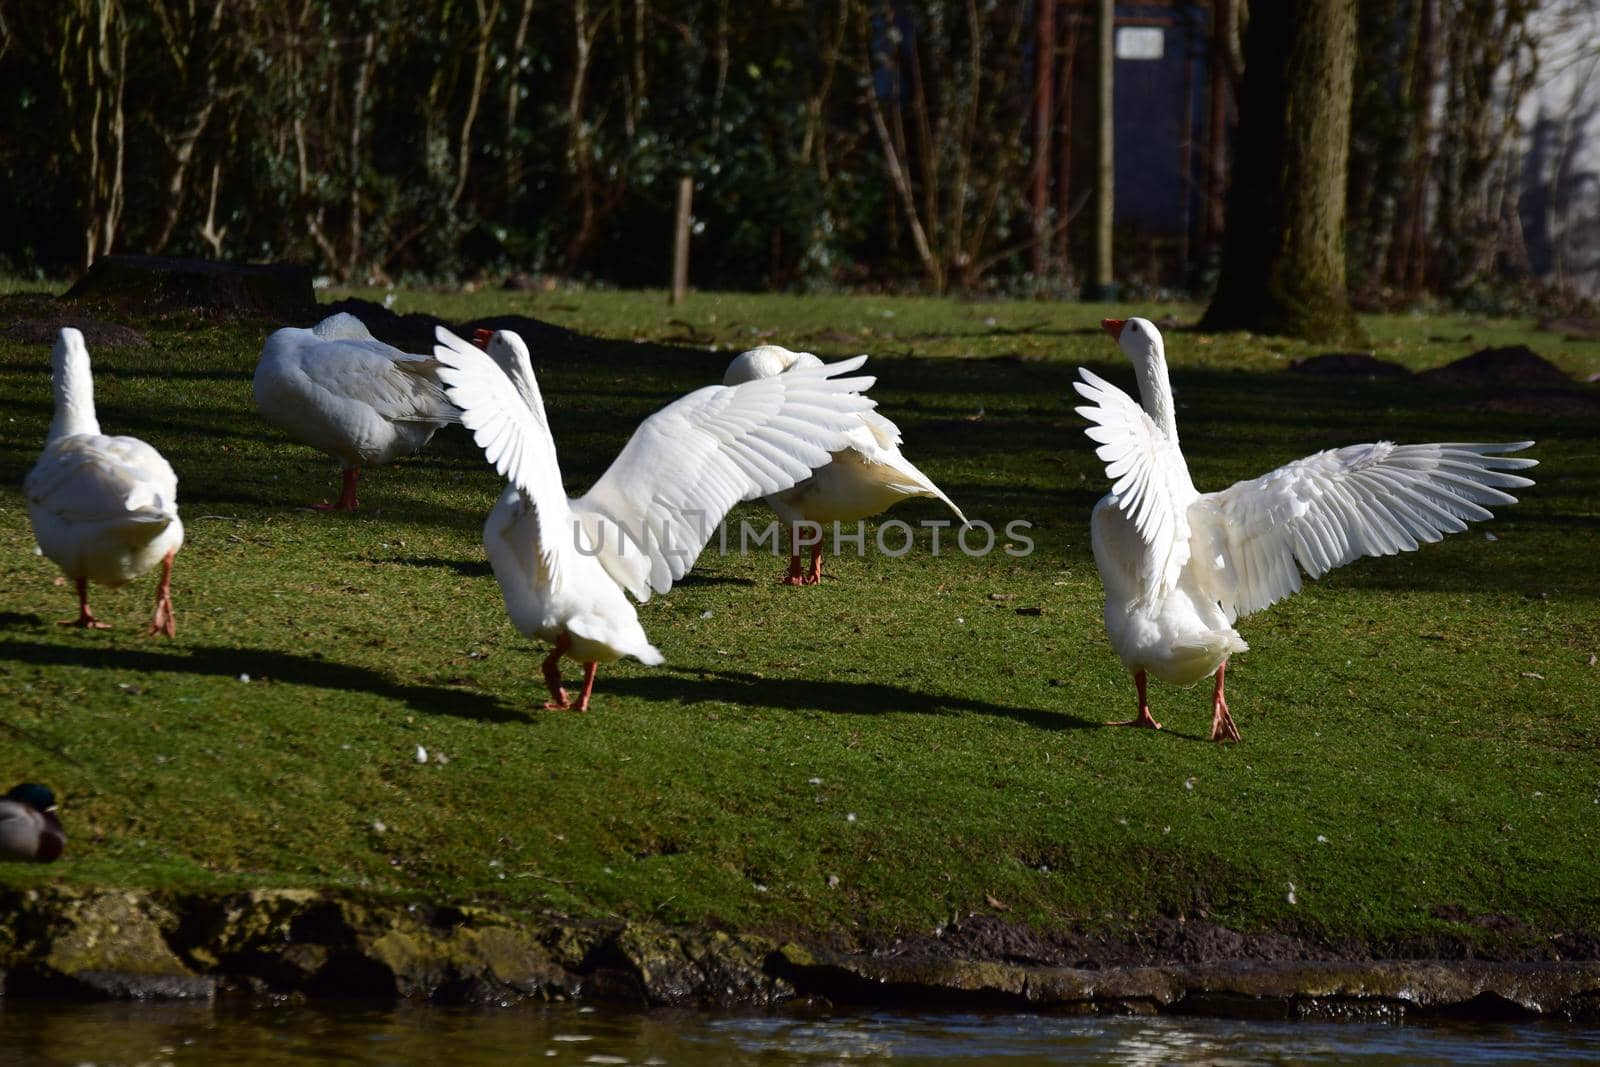 Two white geese are standing on the lawn spread her plumage by Luise123